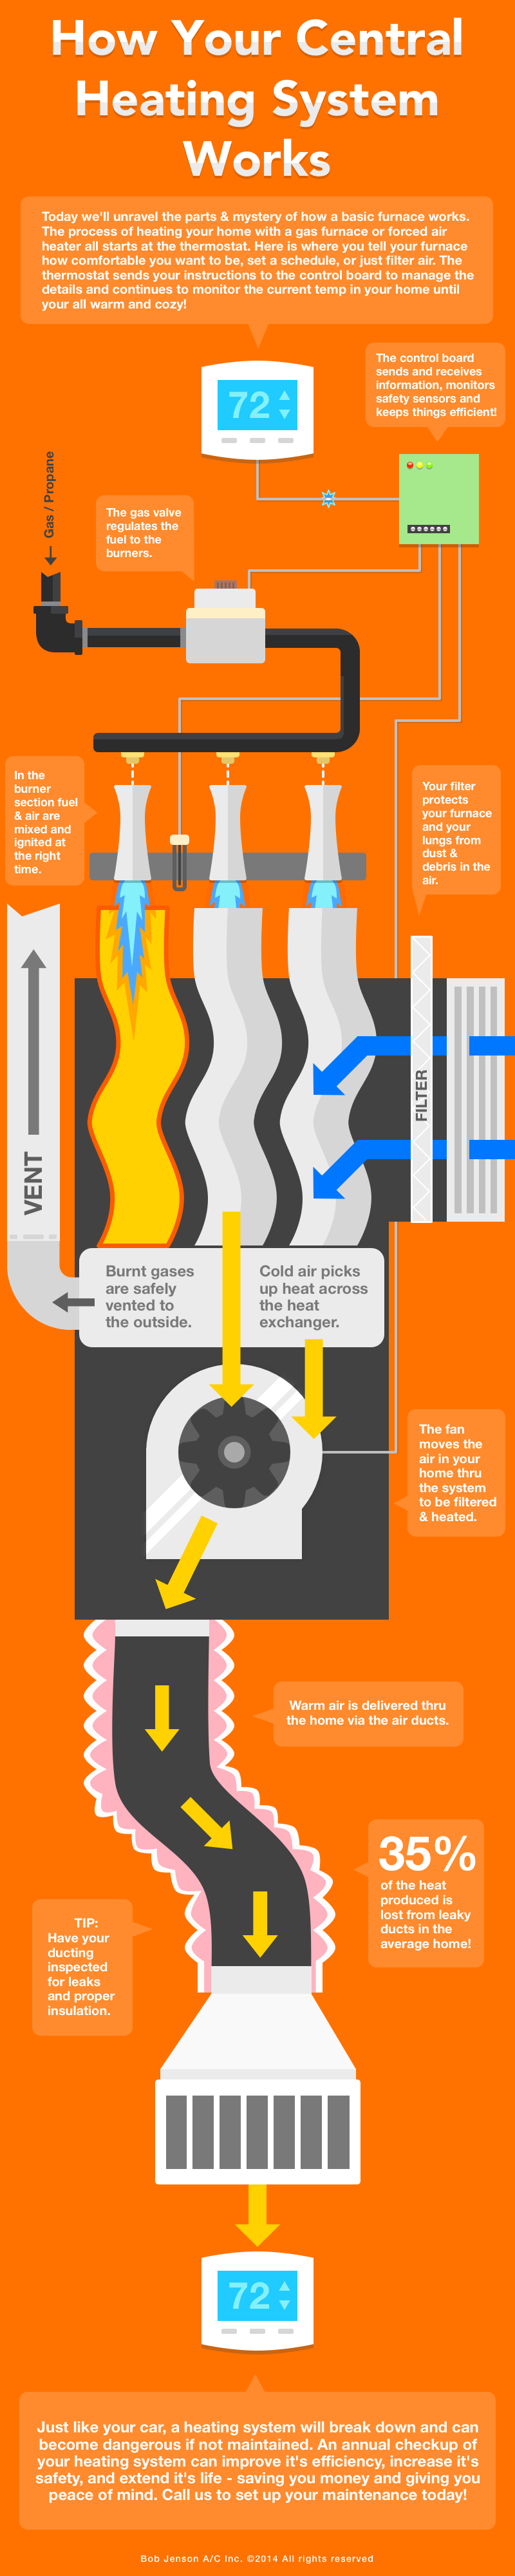 How Your Central Heating Works